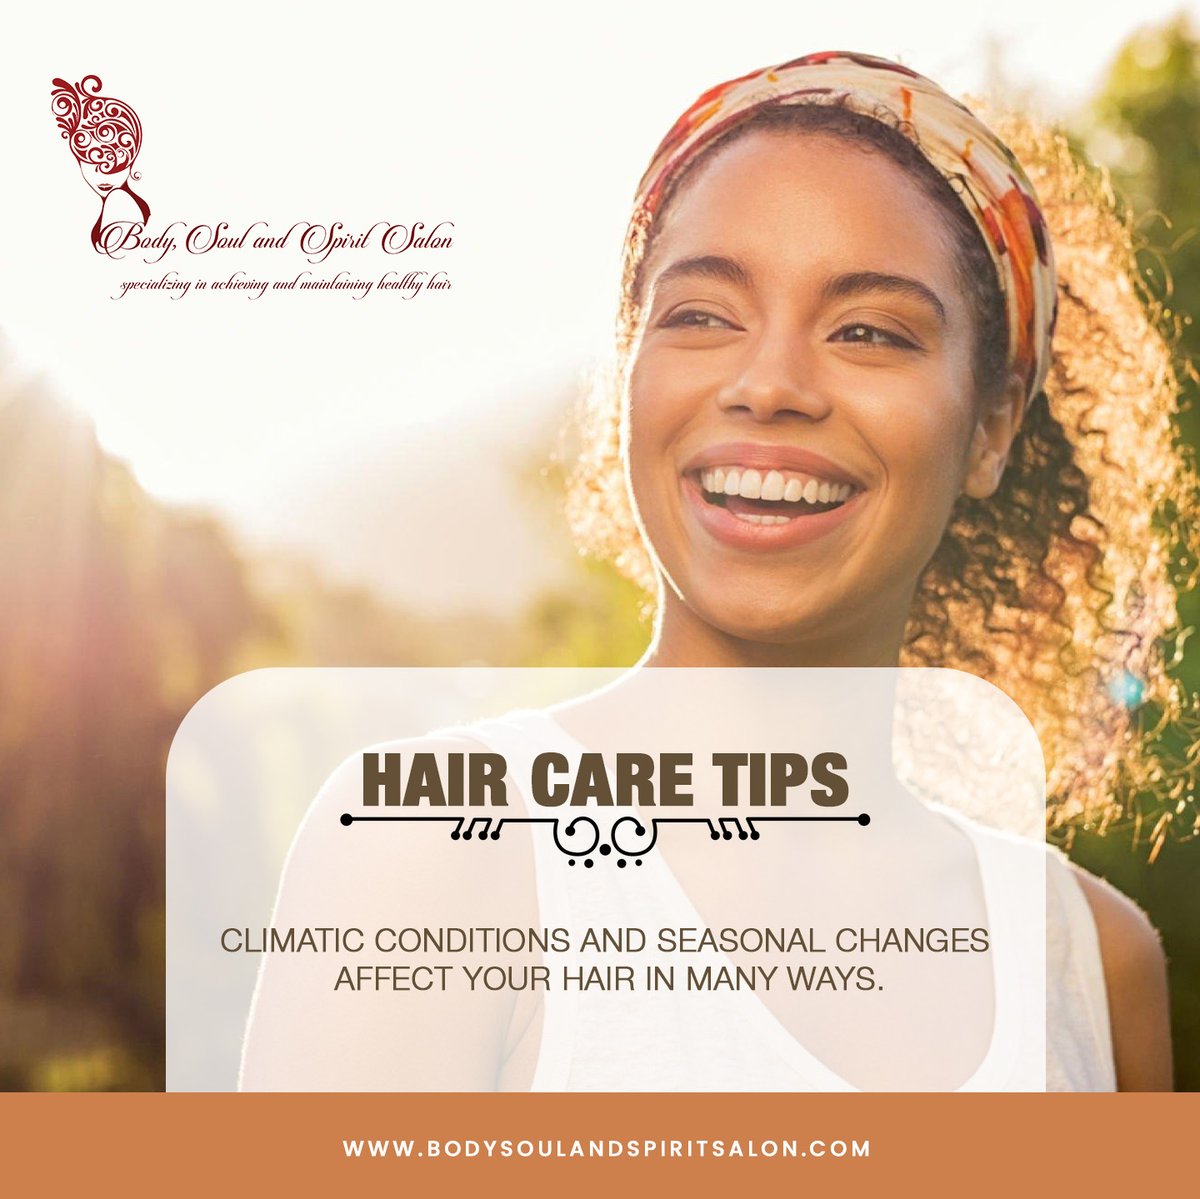 Hair Care Tips: 

Climatic conditions and seasonal changes affect your hair in many ways.

#HairCareTips #BodySoulSpirit #DidYouKnow #HairGoals #HairCare #HealthyHair